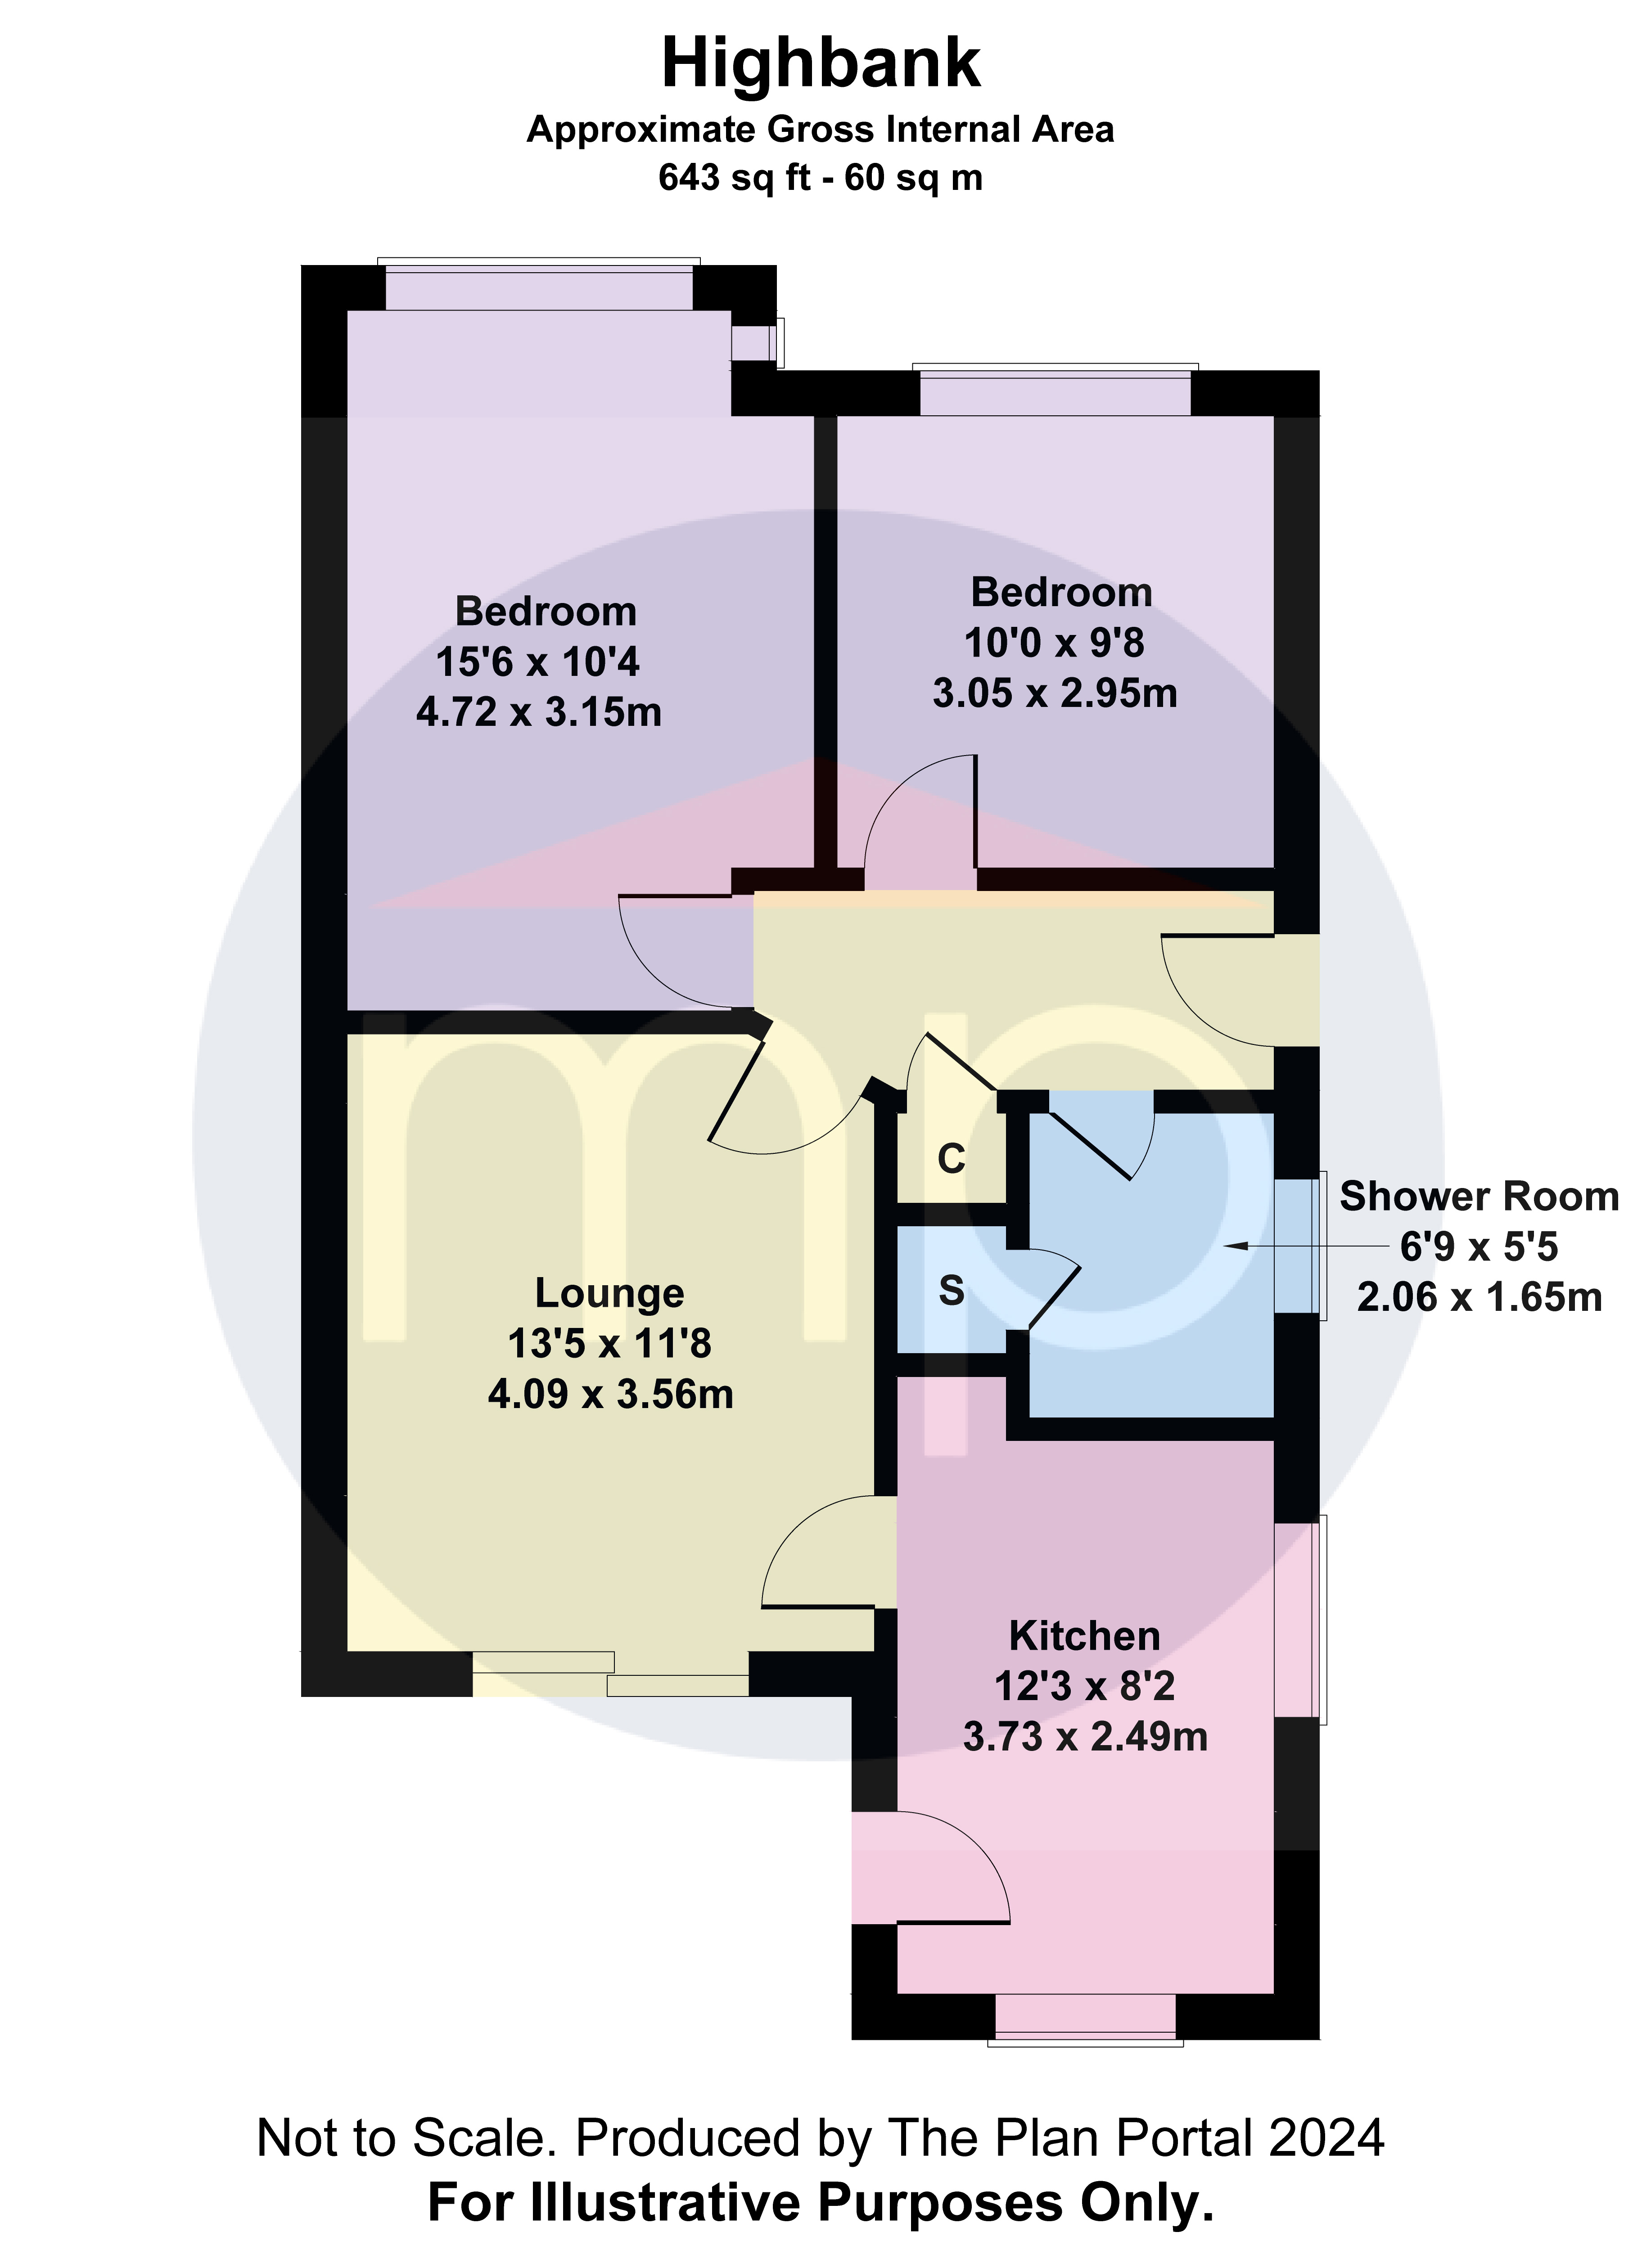 2 bed bungalow for sale - Property floorplan